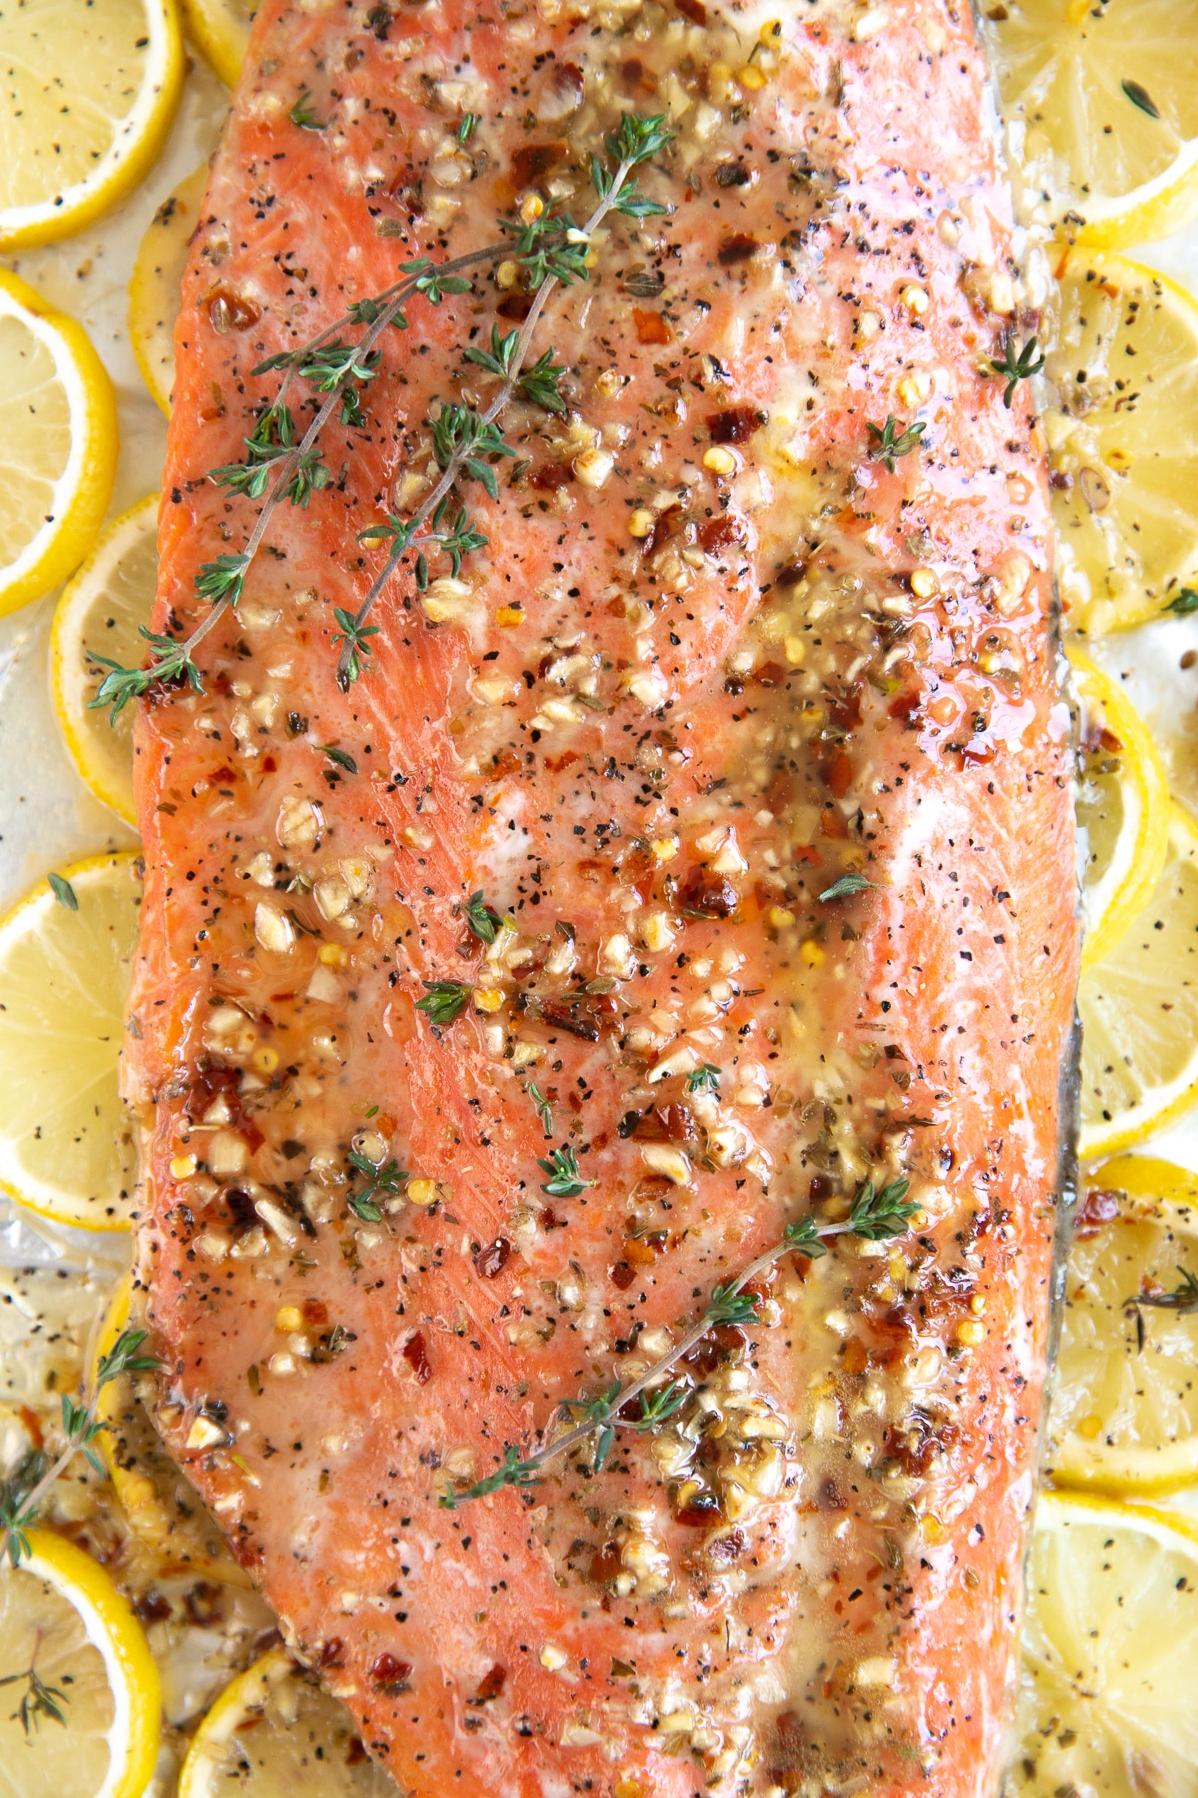  A juicy salmon fillet topped with zesty lemon butter